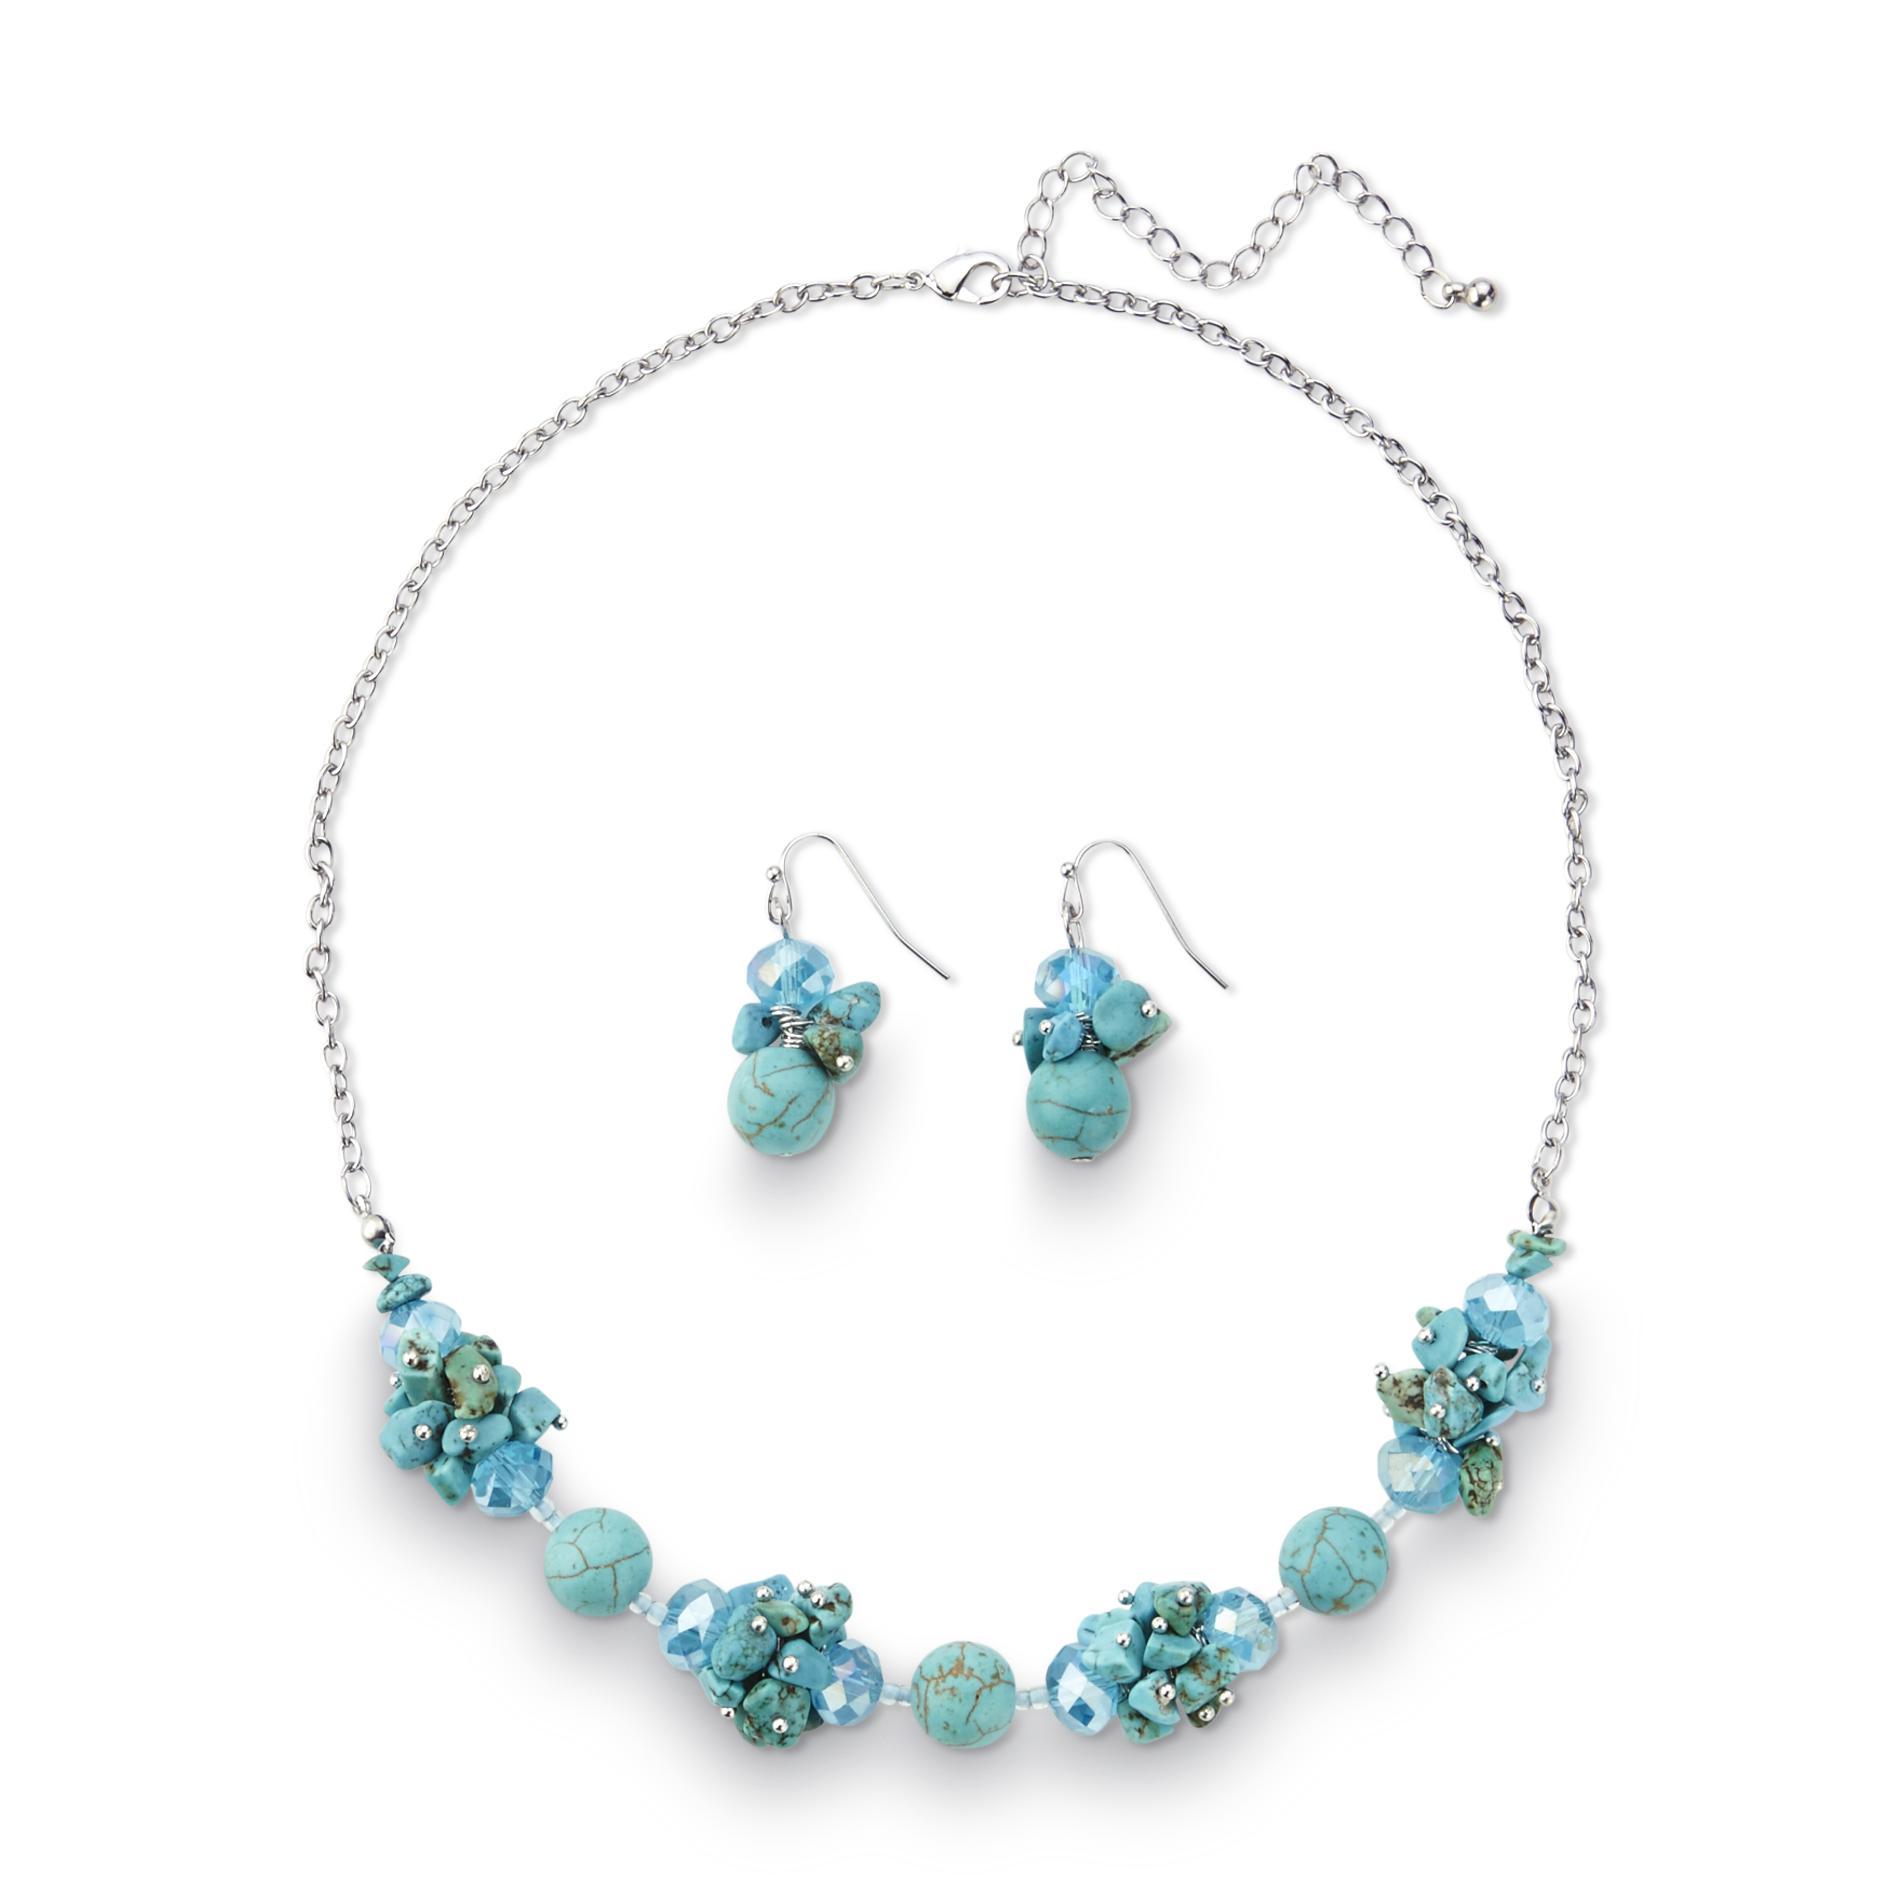 Jaclyn Smith Women's Cluster Necklace & Earrings - Mother's Day